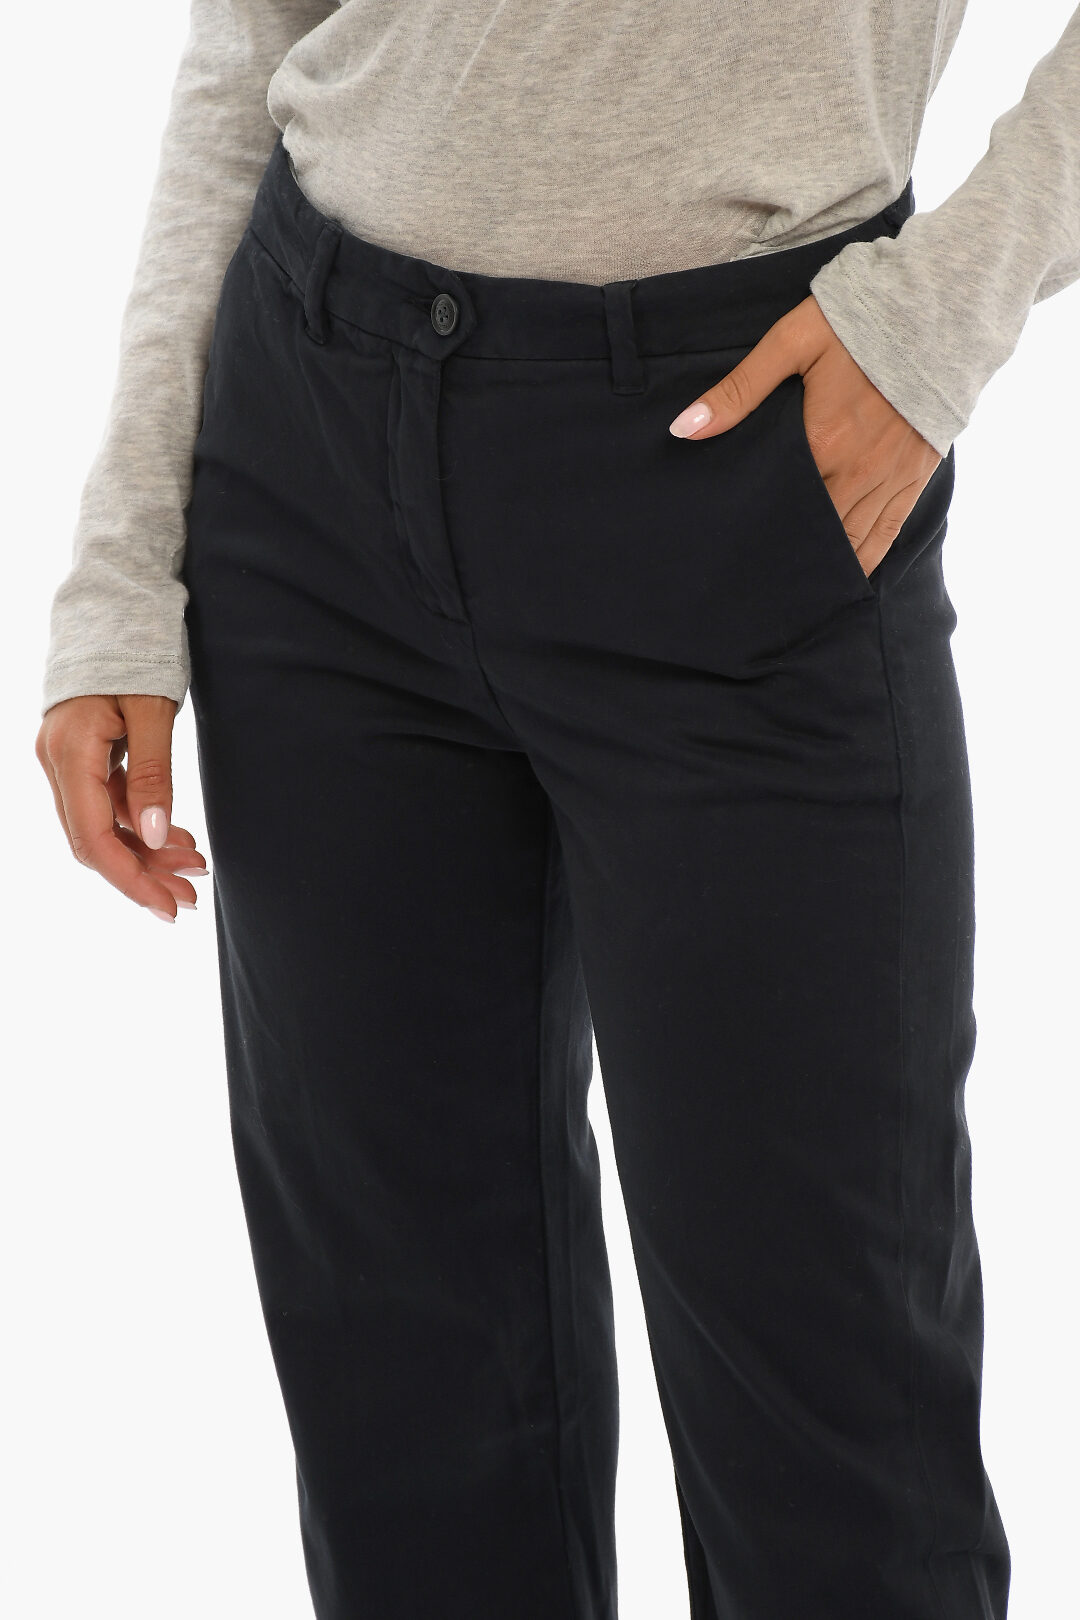 https://data.glamood.com/imgprodotto/cotton-stretch-american-pants-with-belt-loops_1380049_zoom.jpg